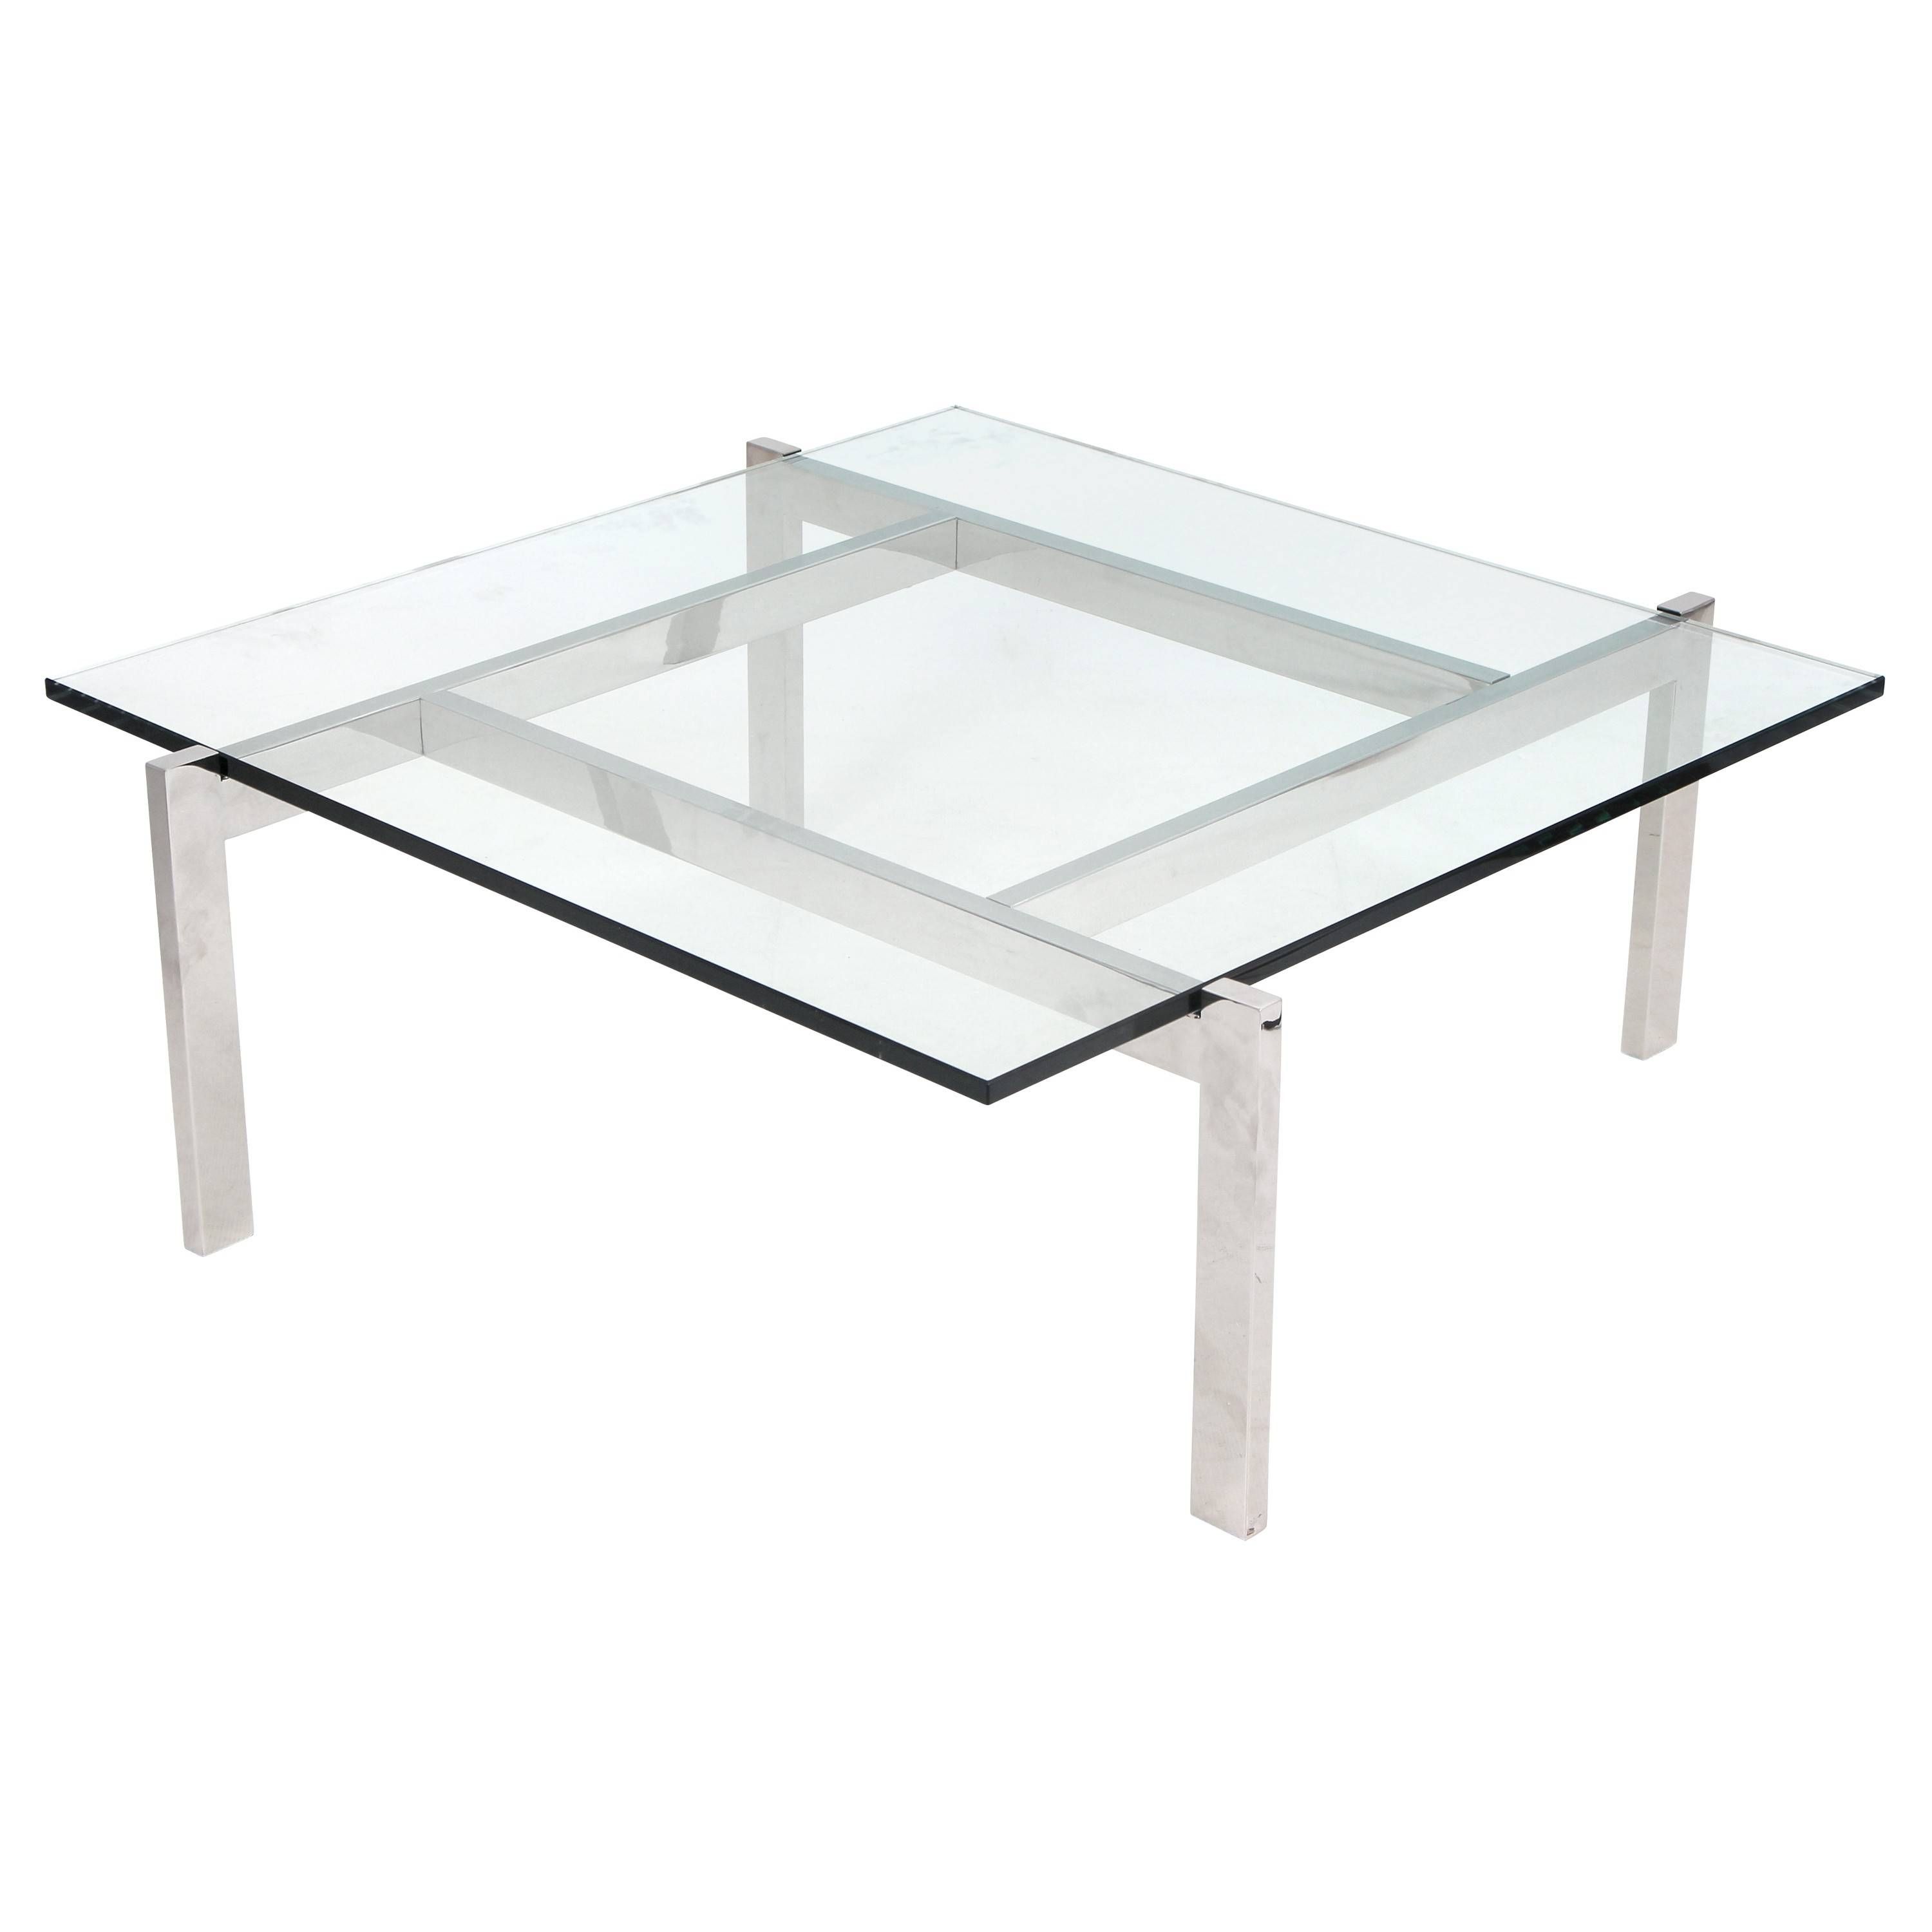 Square Glass Coffee Table Contemporary For Modern Square Glass Coffee Tables (View 2 of 15)